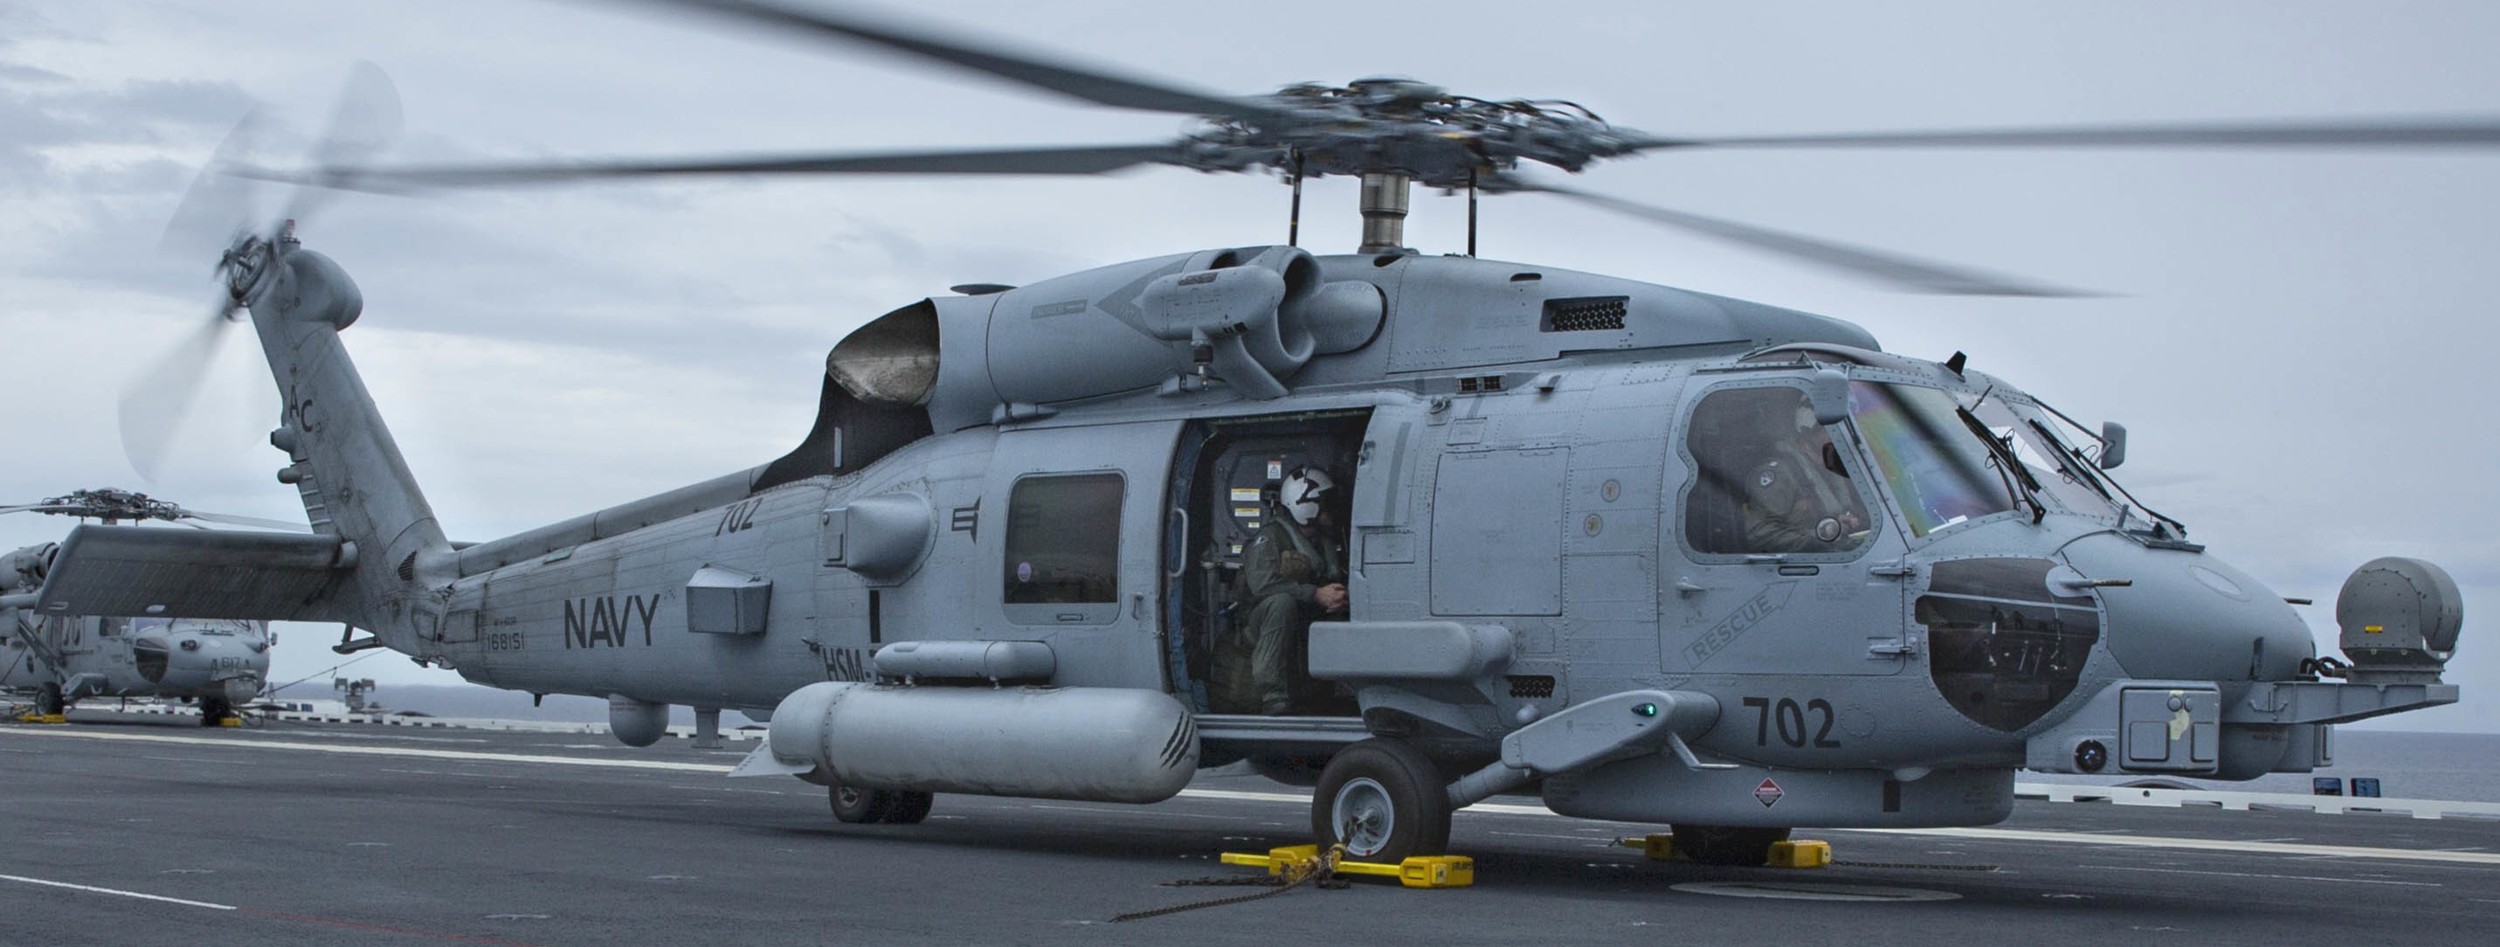 hsm-74 swamp foxes helicopter maritime strike squadron us navy mh-60r seahawk 2014 20 uss gettysburg cg-64